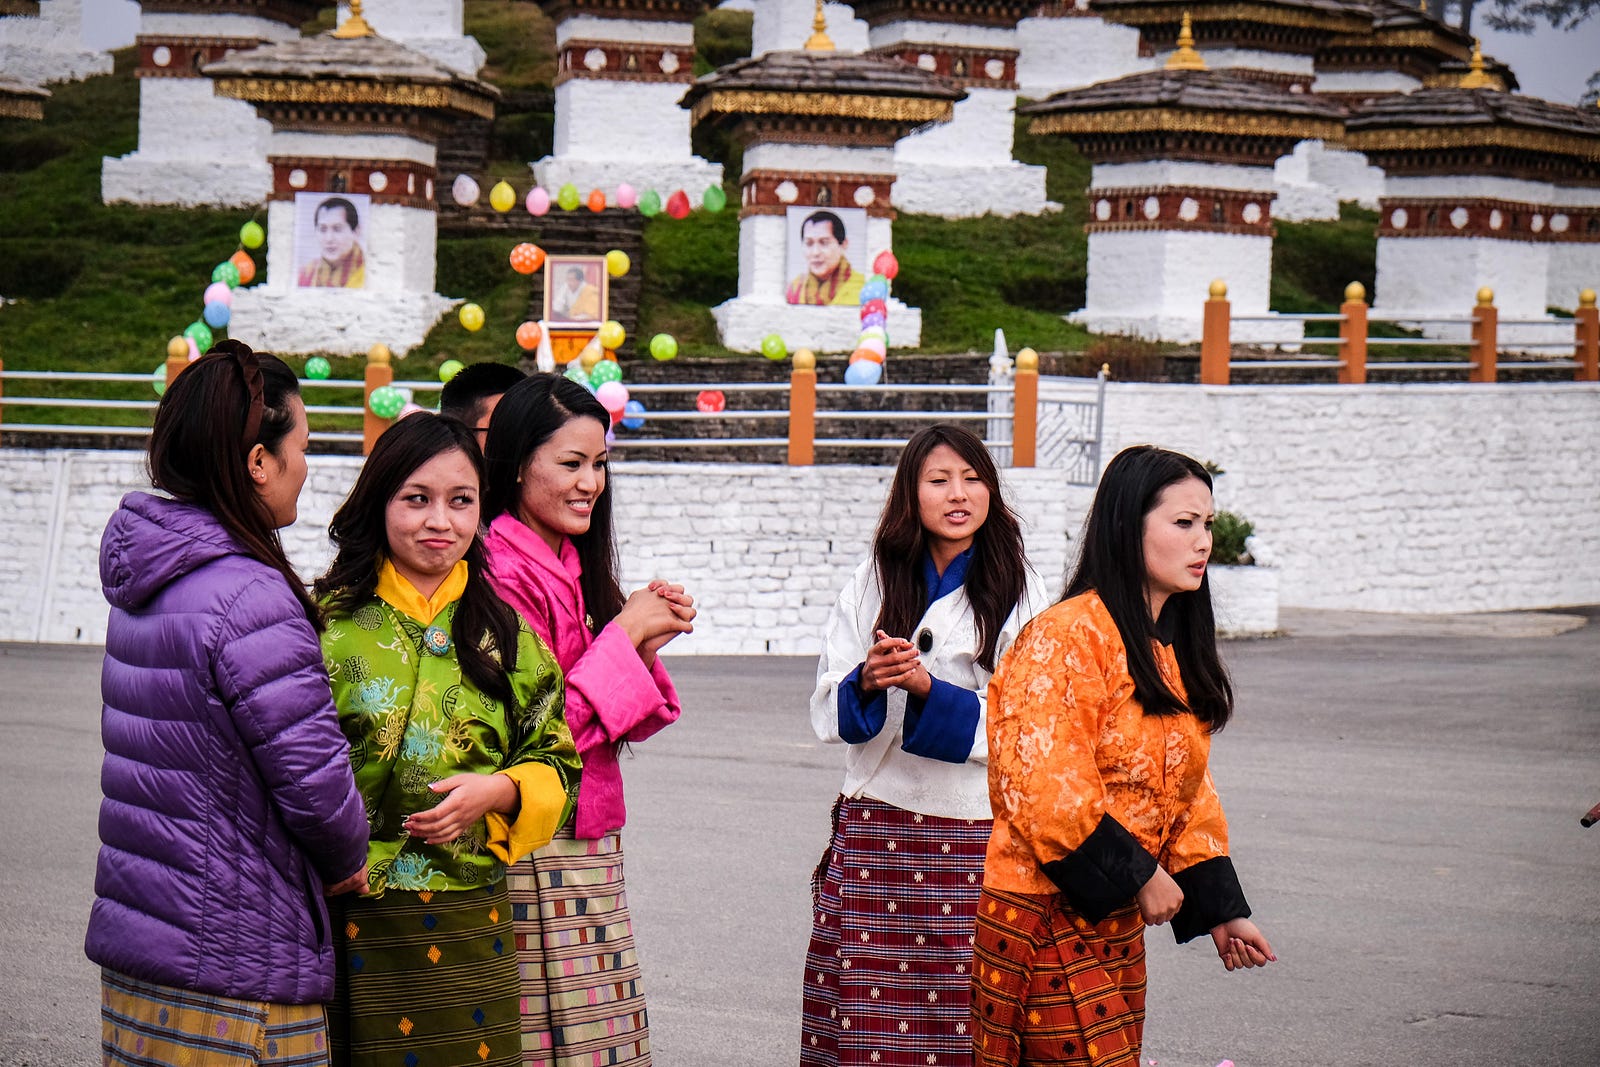 What Can We Learn From Bhutan, the "World's Happiest Country?"